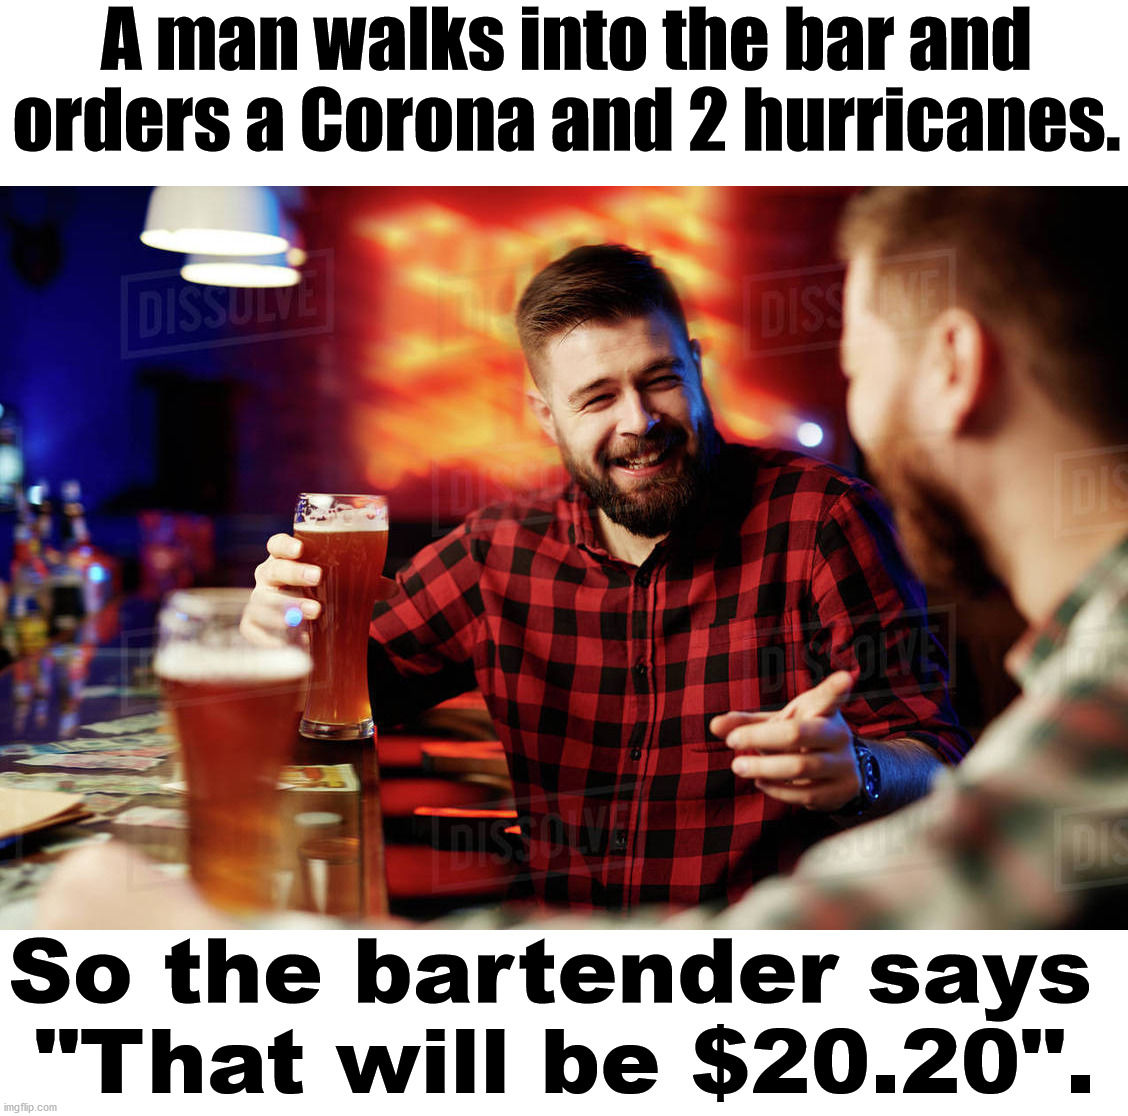 Now 2 hurricanes aimed for the Gulf... 2020 what a year from hell. | A man walks into the bar and orders a Corona and 2 hurricanes. So the bartender says 
"That will be $20.20". | image tagged in 2020,corona,hurricane,bar jokes | made w/ Imgflip meme maker